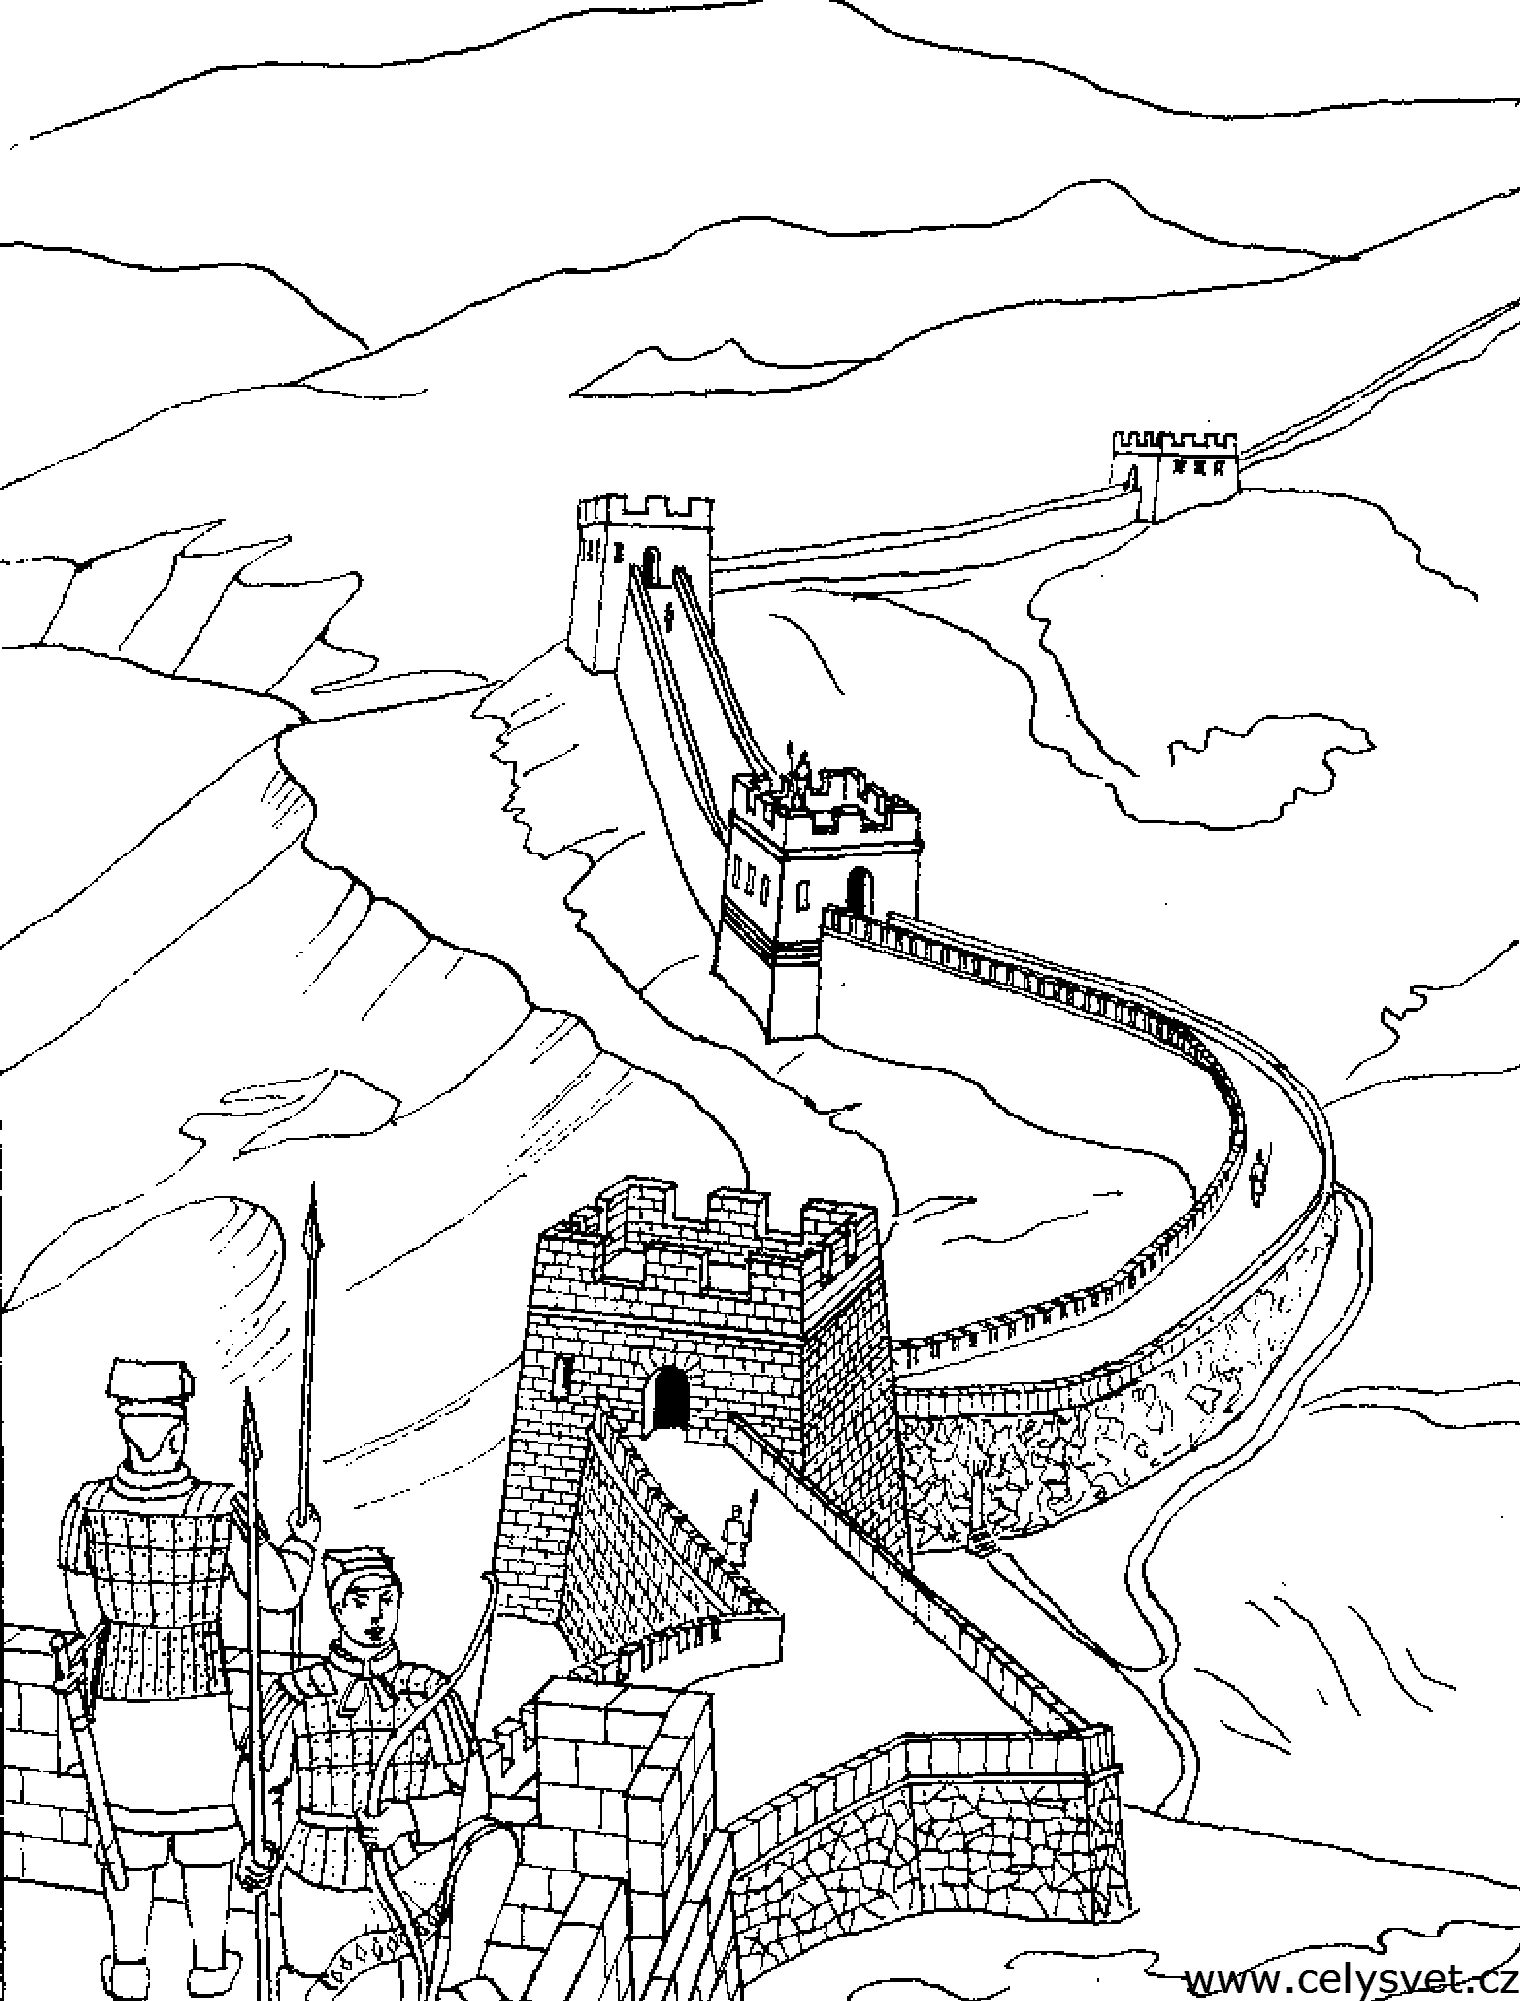 Coloring page of the great wall of China